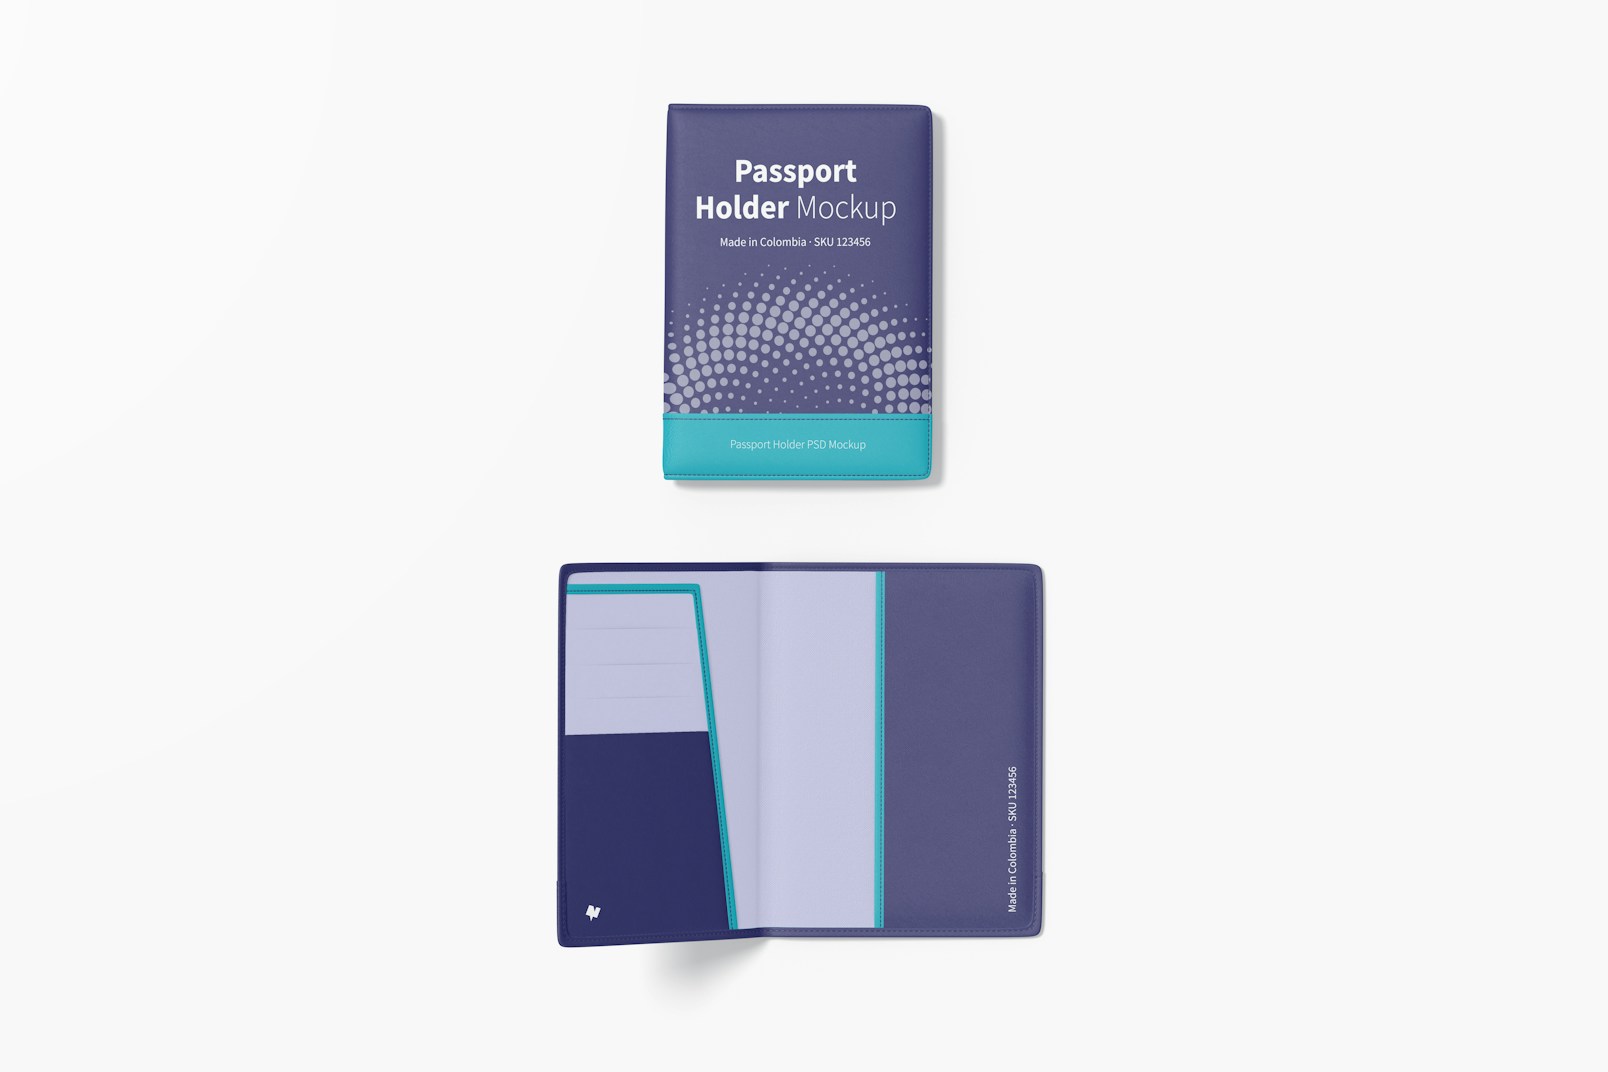 Passport Holders Mockup, Opened and Closed